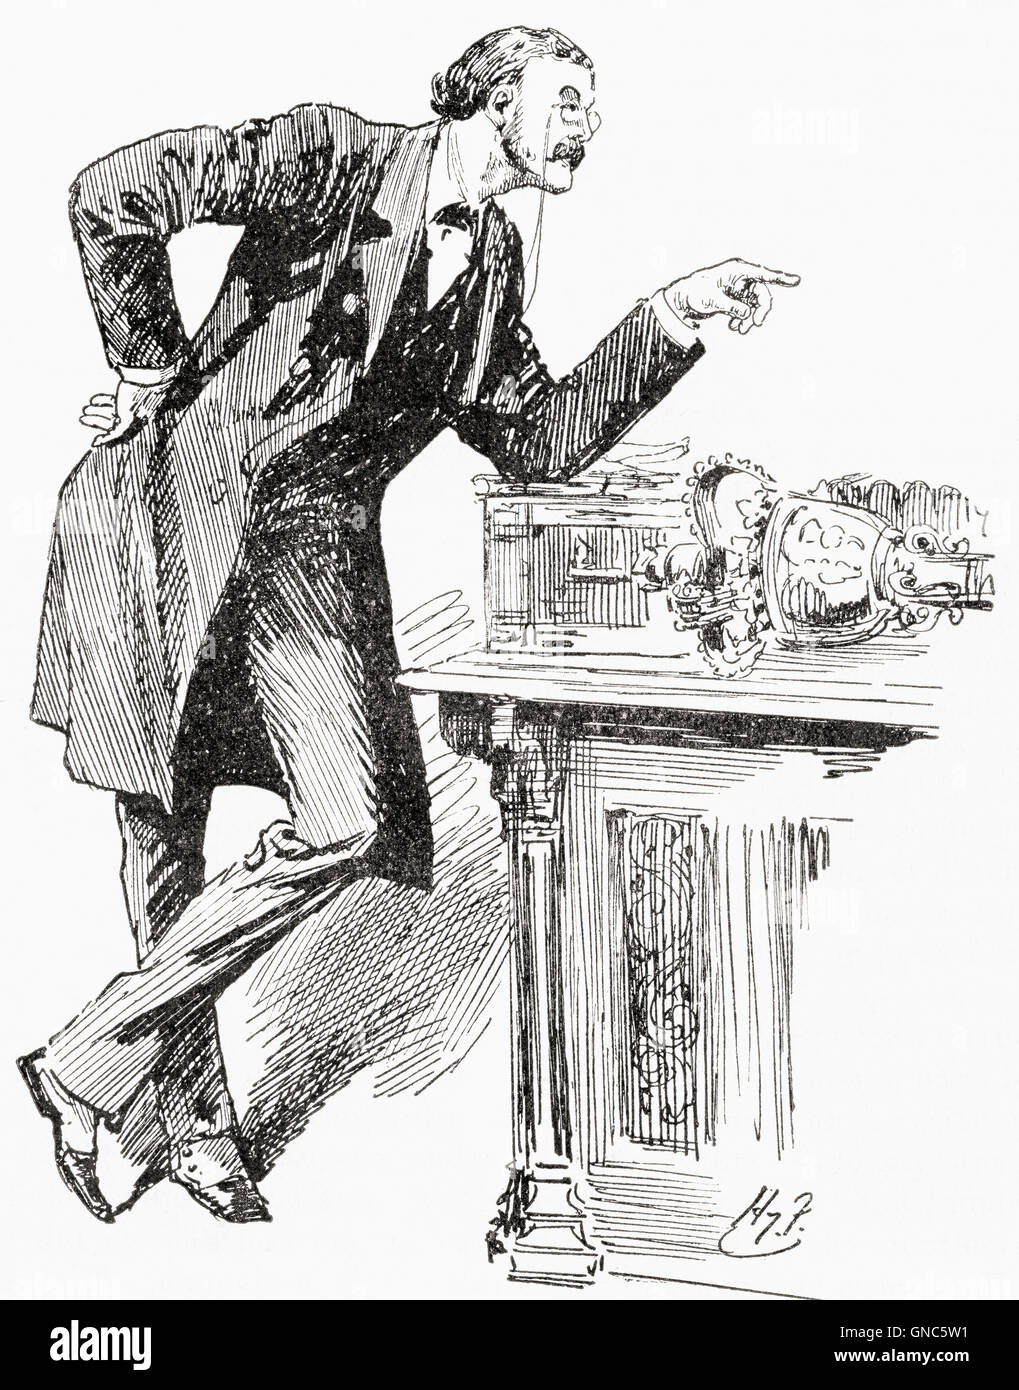 Mr. Balfour speaking in the House of Commons, 1899.  Arthur James Balfour, 1st Earl of Balfour, 1848 –1930.  British Conservative politician and Prime Minister of the United Kingdom.  After a sketch by Harry Furniss. Stock Photo